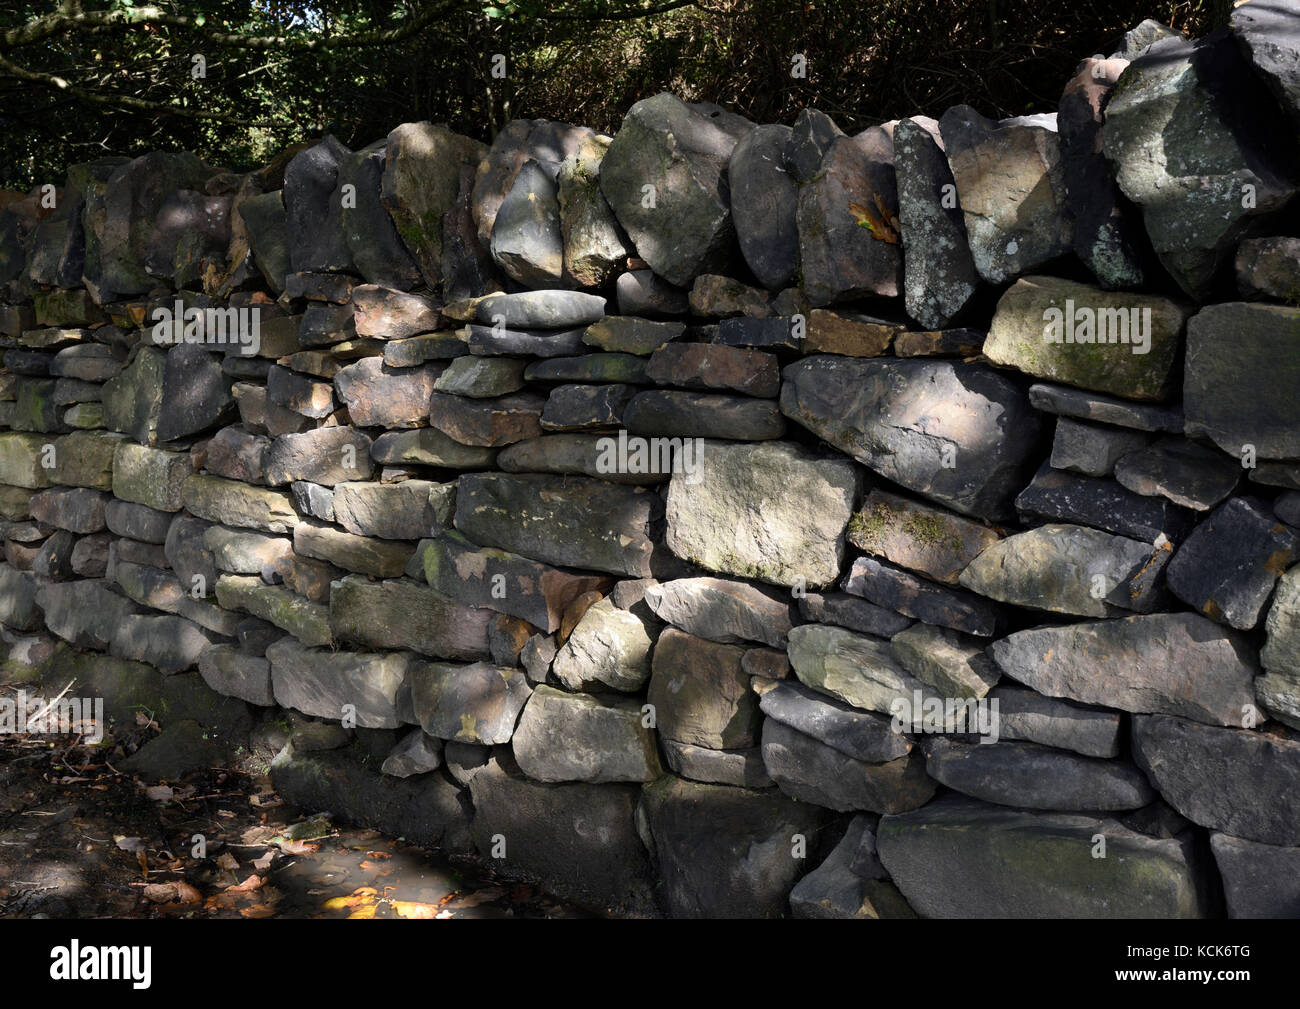 Dry stone wall with dappled sunlight in burrs country park bury lancashire uk Stock Photo